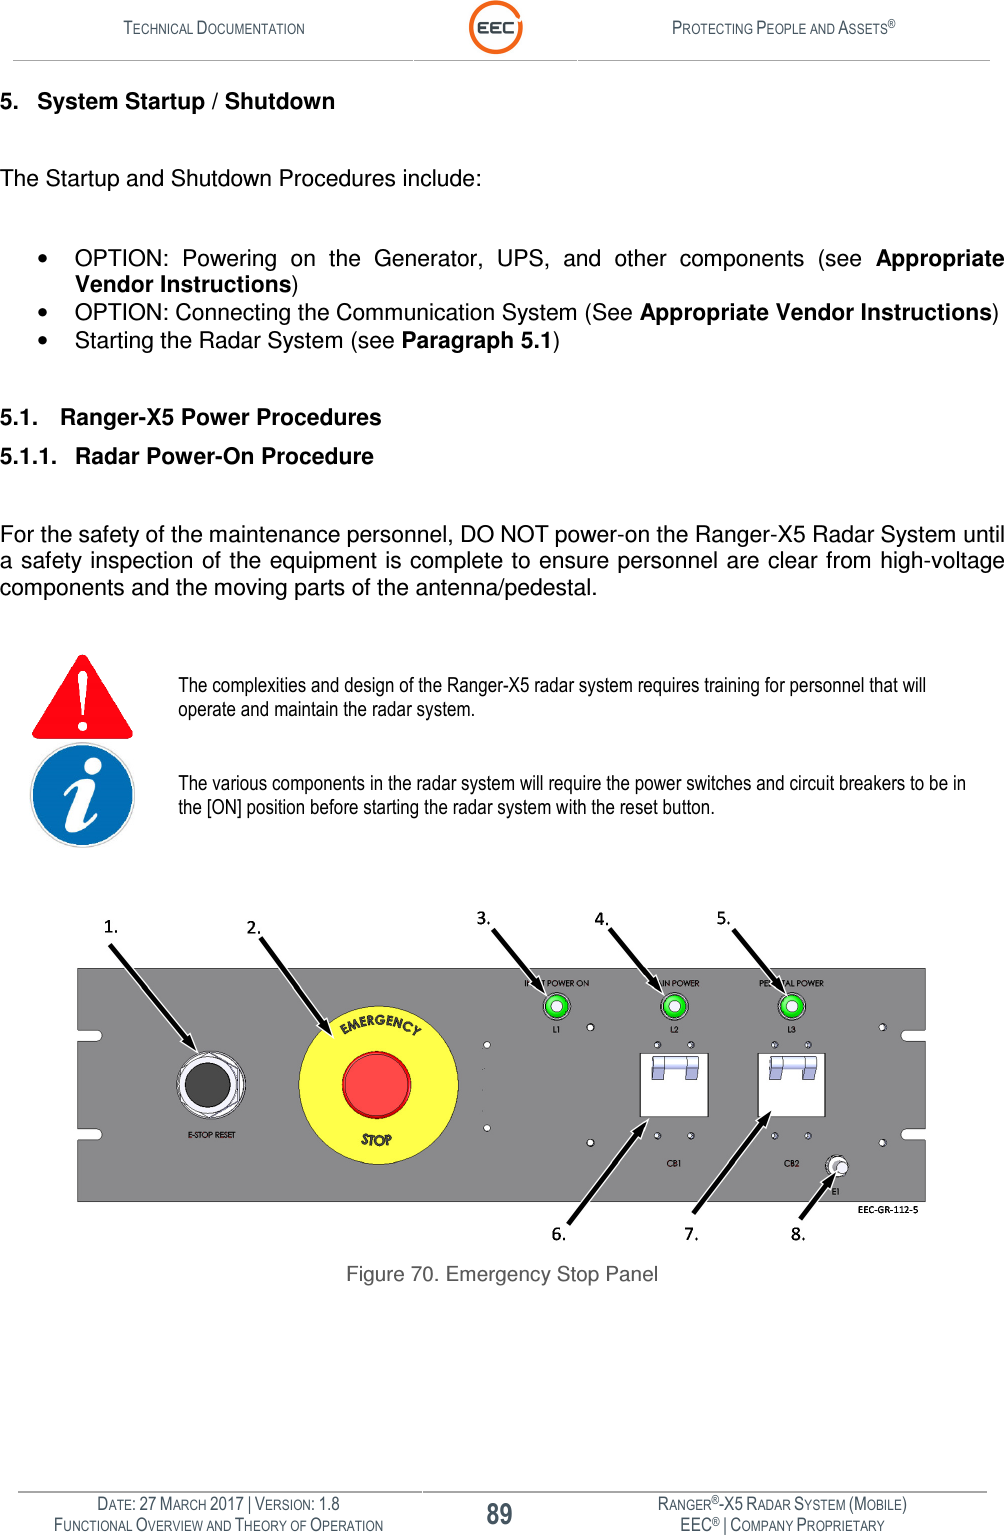 TECHNICAL DOCUMENTATION  PROTECTING PEOPLE AND ASSETS®  DATE: 27 MARCH 2017 | VERSION: 1.8 89 RANGER®-X5 RADAR SYSTEM (MOBILE) FUNCTIONAL OVERVIEW AND THEORY OF OPERATION EEC® | COMPANY PROPRIETARY  5. System Startup / Shutdown  The Startup and Shutdown Procedures include:  •  OPTION:  Powering  on  the  Generator,  UPS,  and  other  components  (see  Appropriate Vendor Instructions) •  OPTION: Connecting the Communication System (See Appropriate Vendor Instructions) •  Starting the Radar System (see Paragraph 5.1)  5.1. Ranger-X5 Power Procedures 5.1.1.  Radar Power-On Procedure  For the safety of the maintenance personnel, DO NOT power-on the Ranger-X5 Radar System until a safety inspection of the equipment is complete to ensure personnel are clear from high-voltage components and the moving parts of the antenna/pedestal.   The complexities and design of the Ranger-X5 radar system requires training for personnel that will operate and maintain the radar system.  The various components in the radar system will require the power switches and circuit breakers to be in the [ON] position before starting the radar system with the reset button.   Figure 70. Emergency Stop Panel   